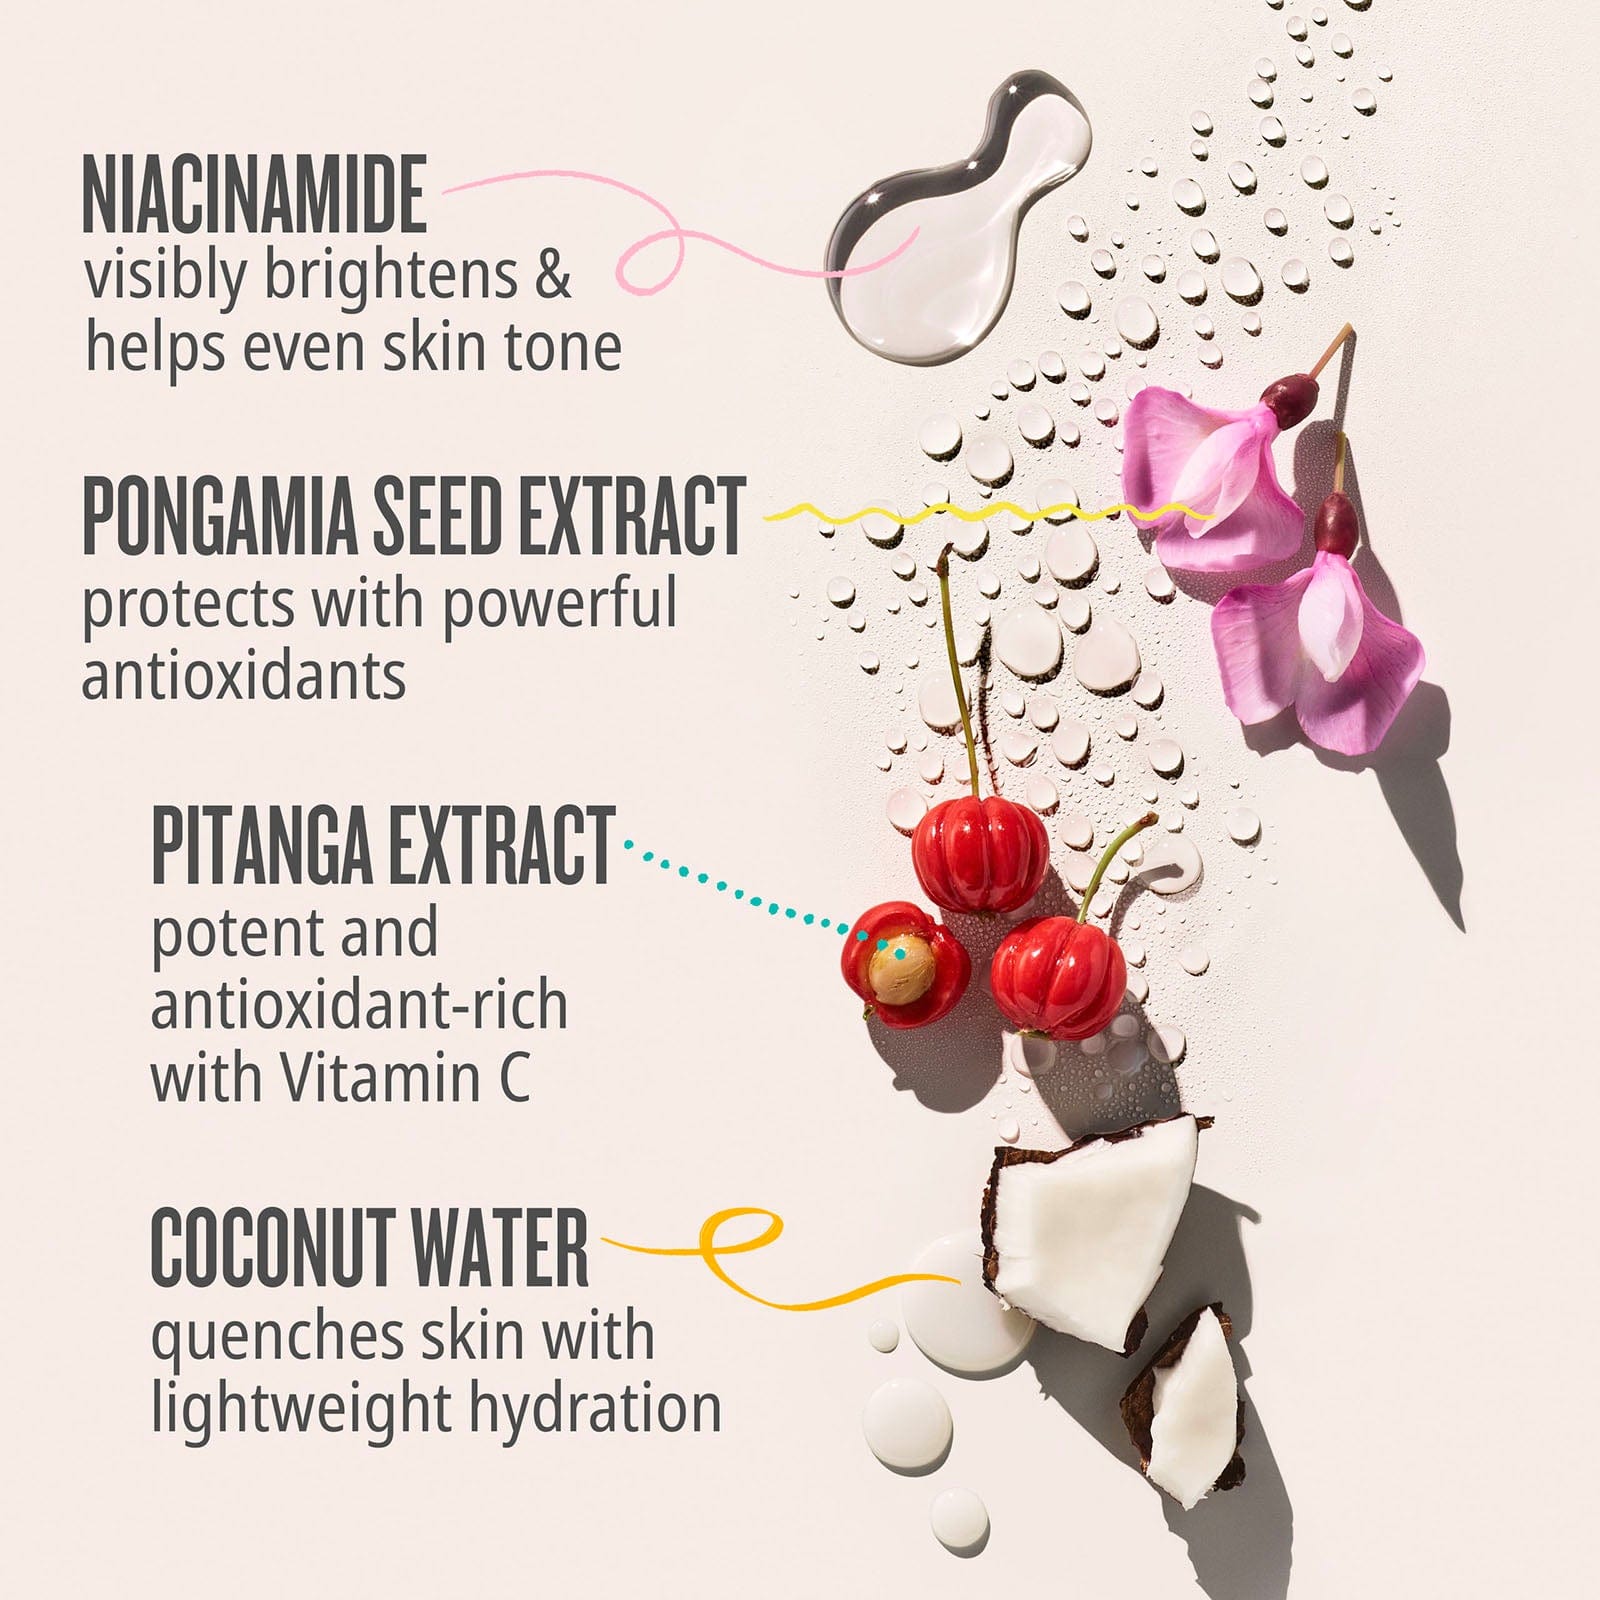 Niacinamide visibly brightens &amp; helps even skin tone, Pongamia seed extract protects with powerful antioxidants, Pitanga Extract potent and antioxidant-rich with vitamic c, Coconut Water quenches skin with lightweight hydration